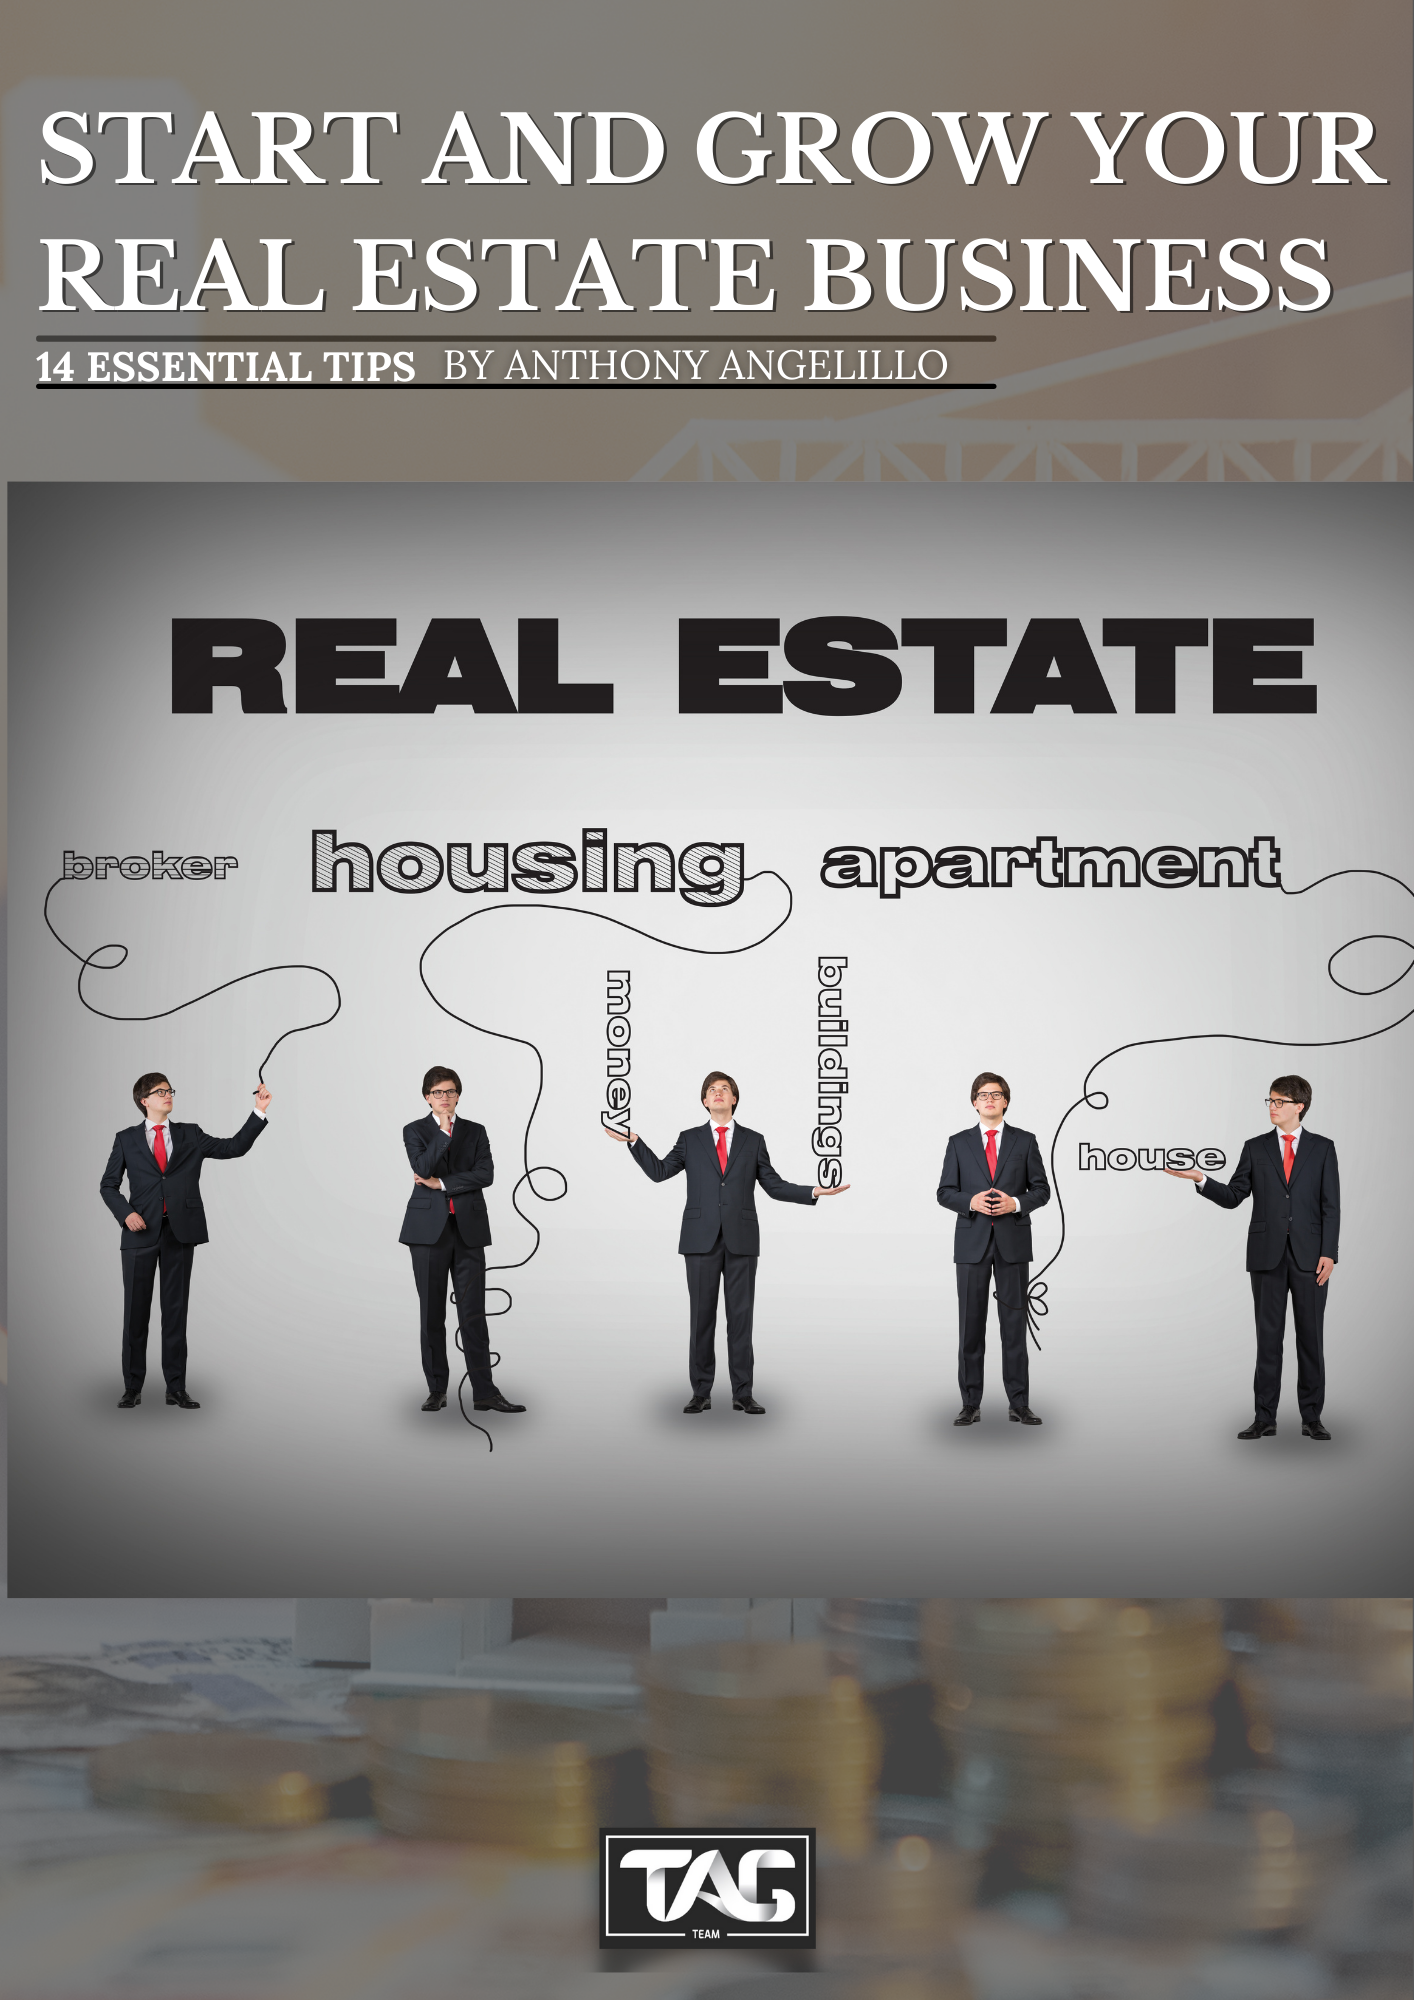 Start and grow your Real Estate Business (1)